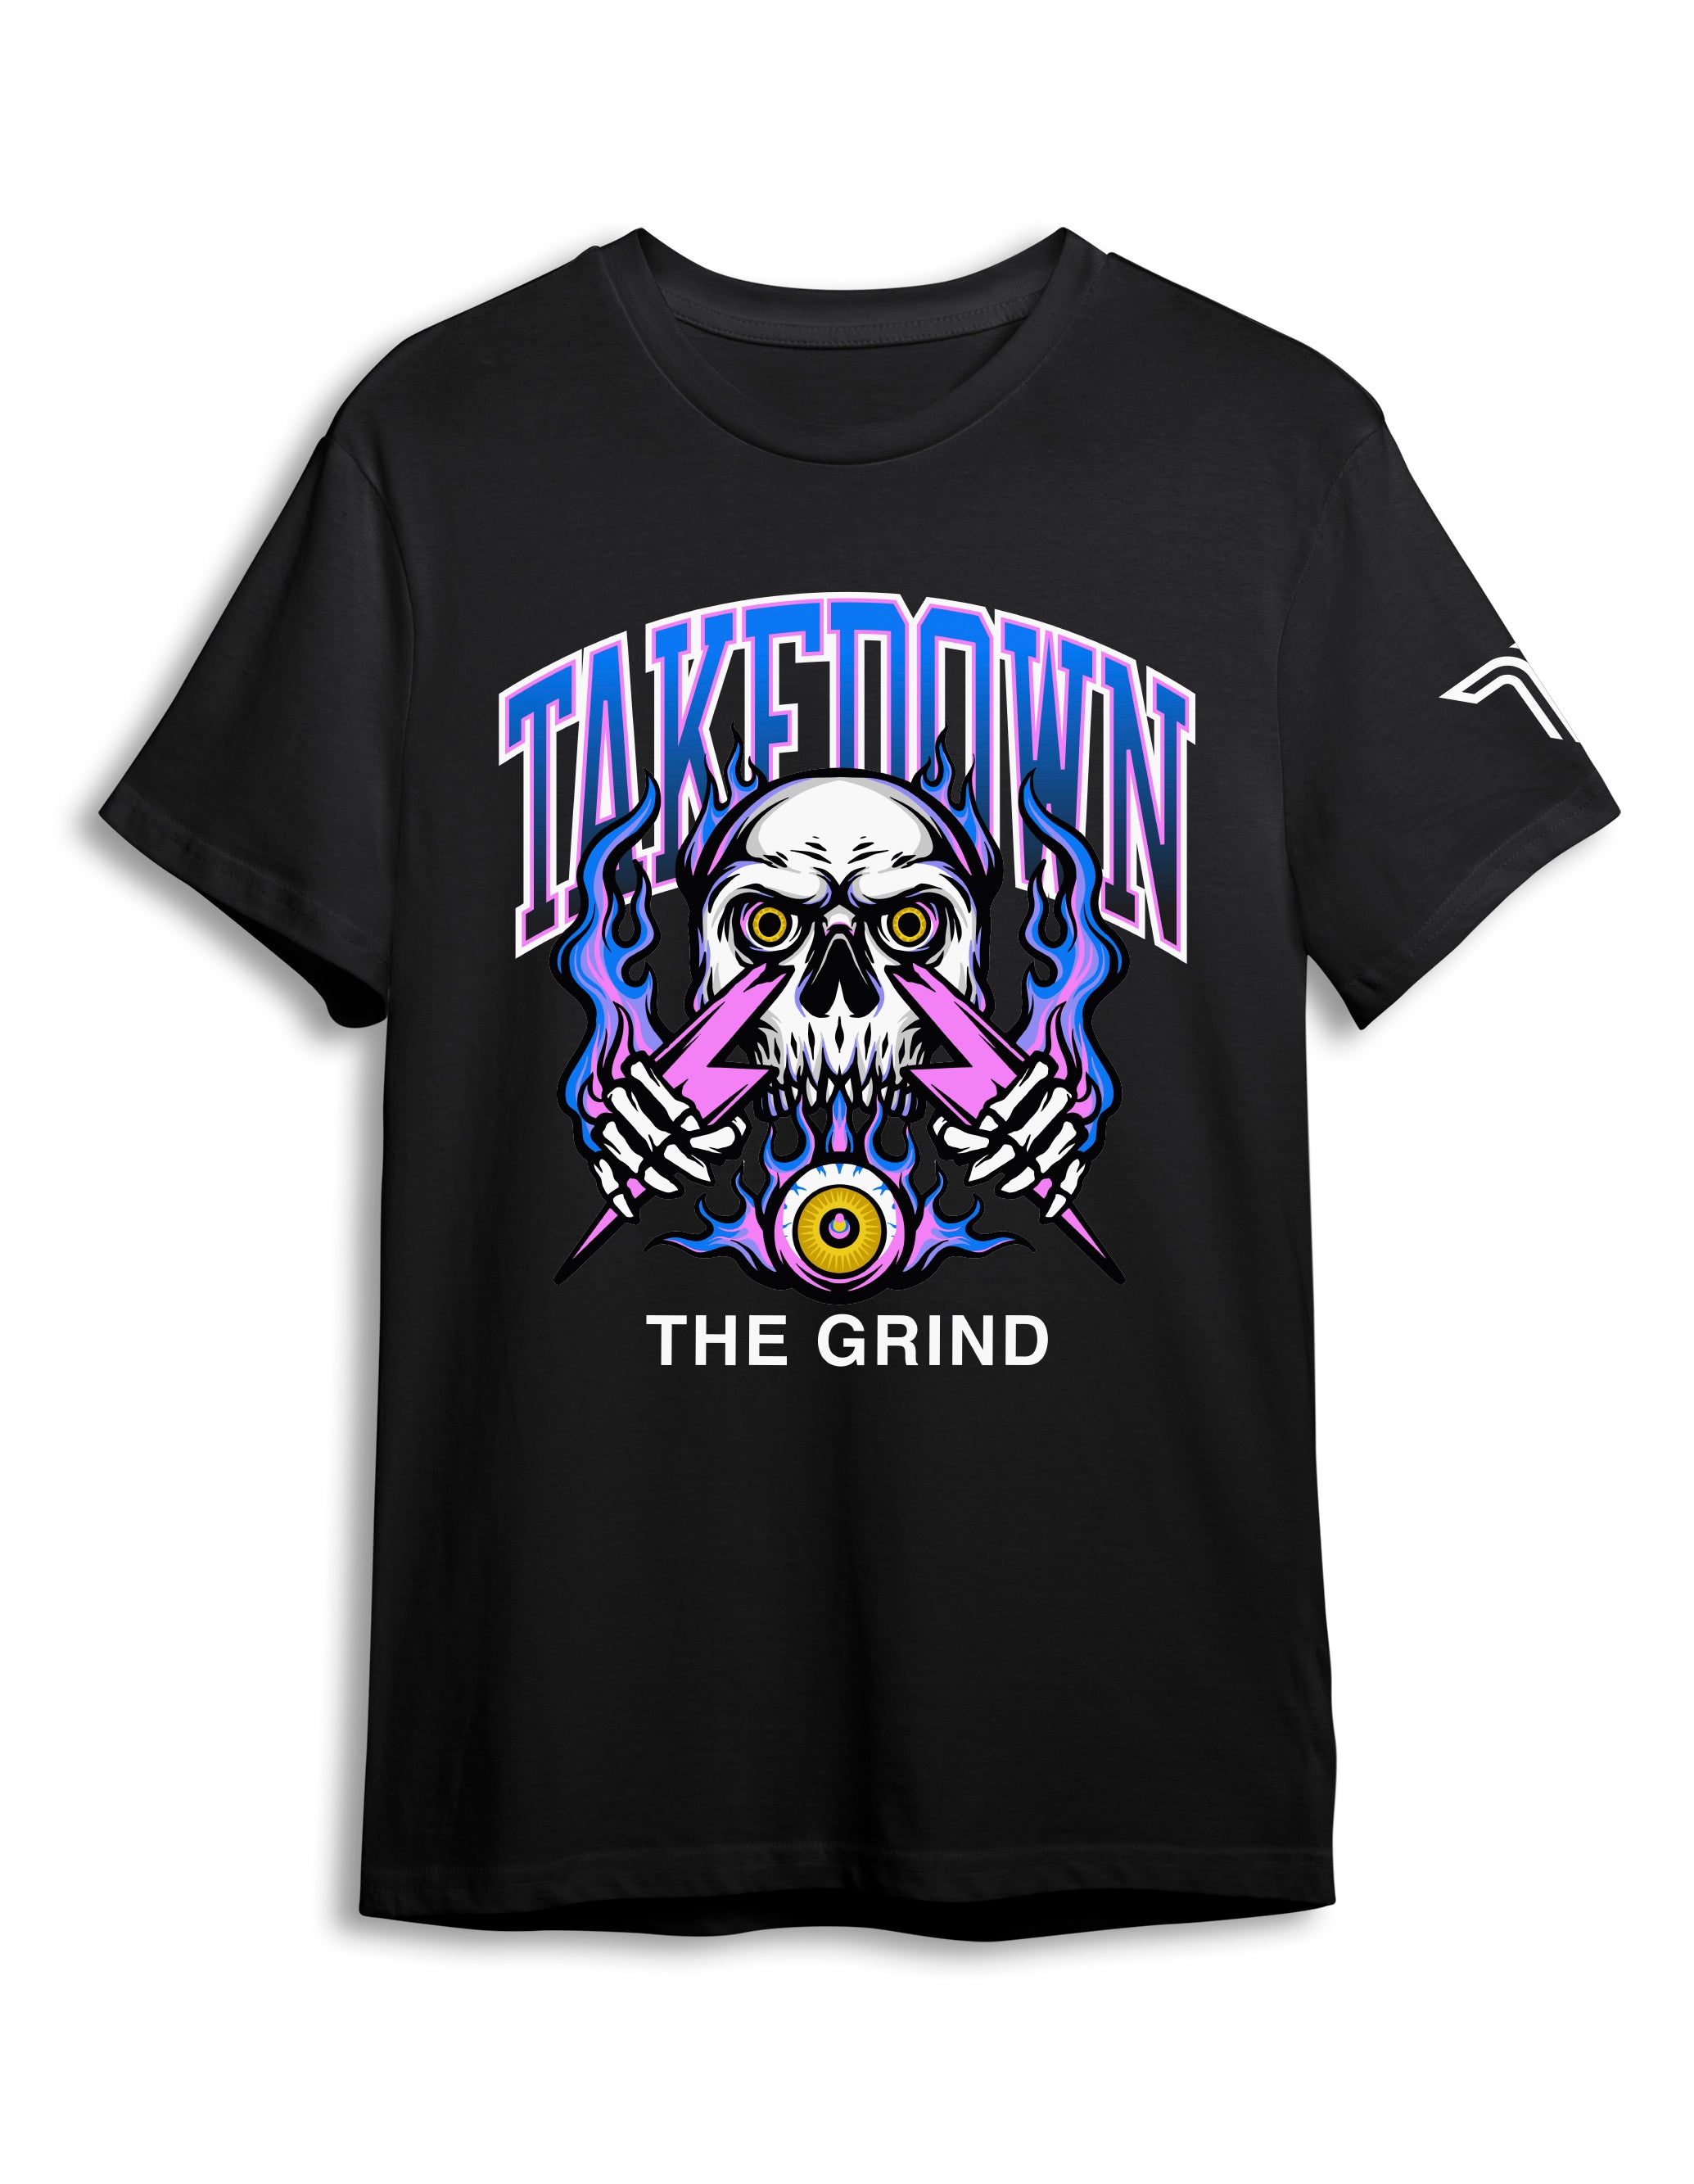 The Grind Graphic T-Shirt